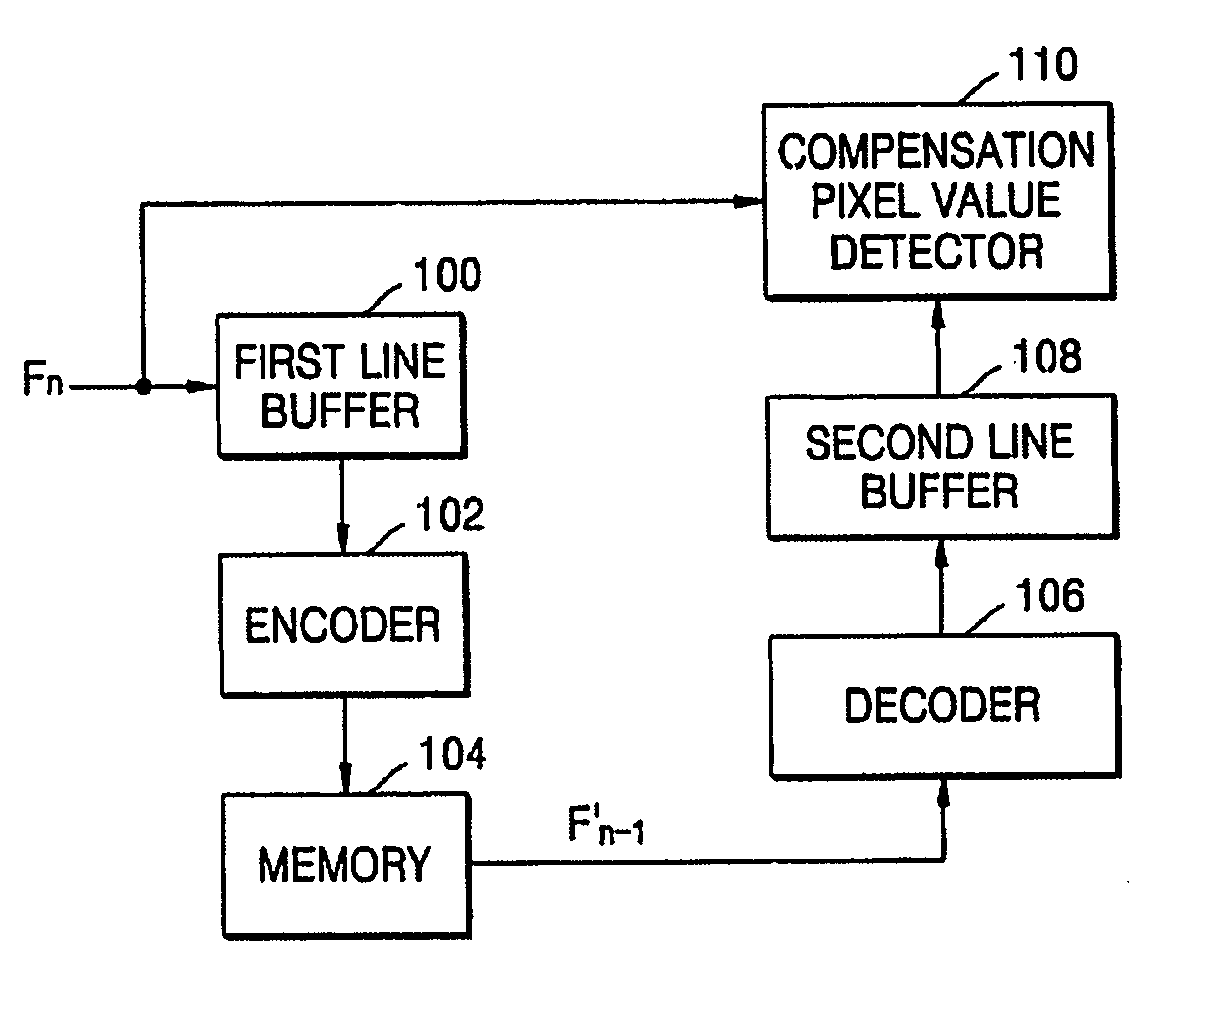 Apparatus and method for performing dynamic capacitance compensation (DCC) in liquid crystal display (LCD)